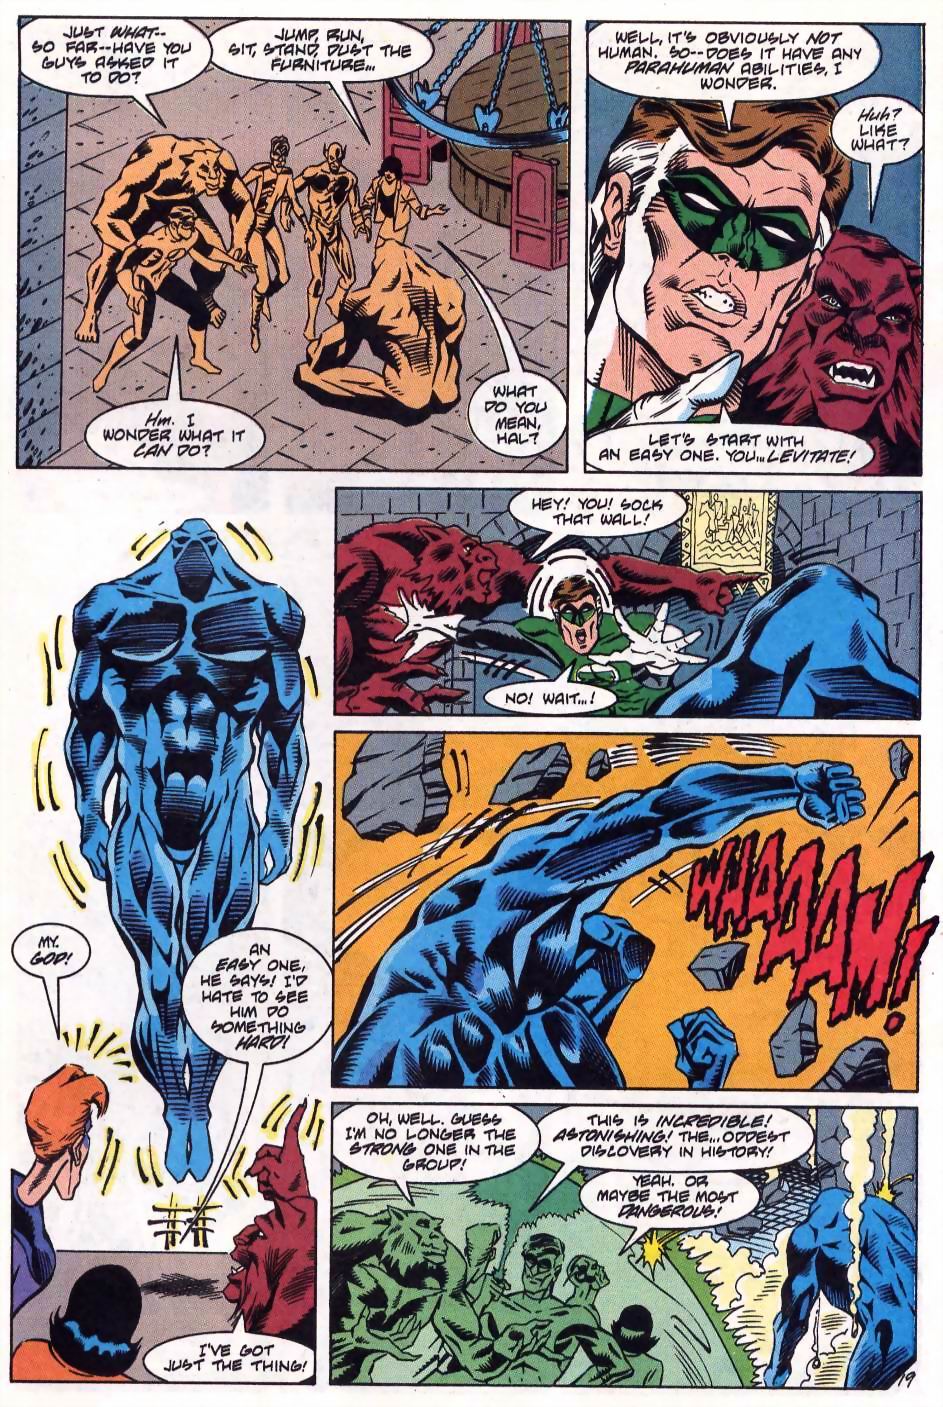 Justice League International (1993) 53 Page 19